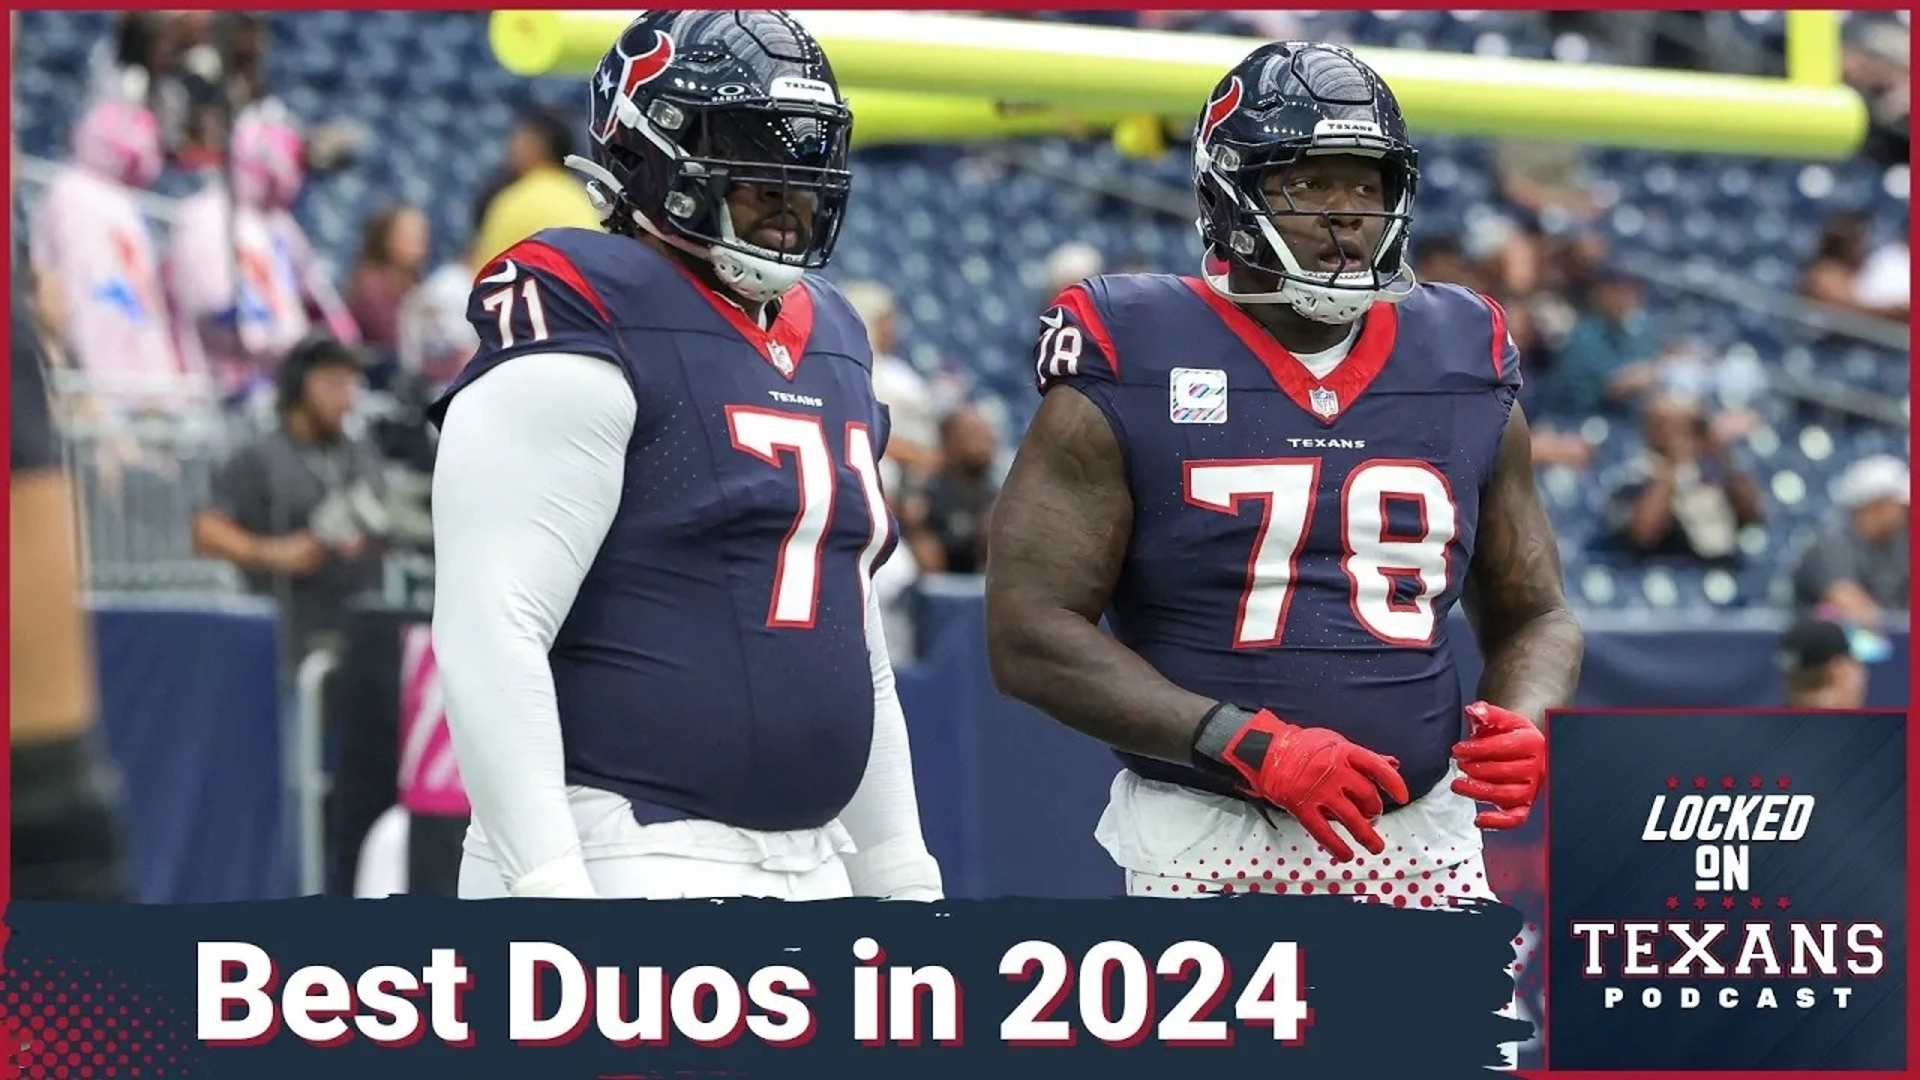 On both sides of the ball, the Houston Texans have talent at each position. However, the Texans have a pair of players who could stand out among the rest.